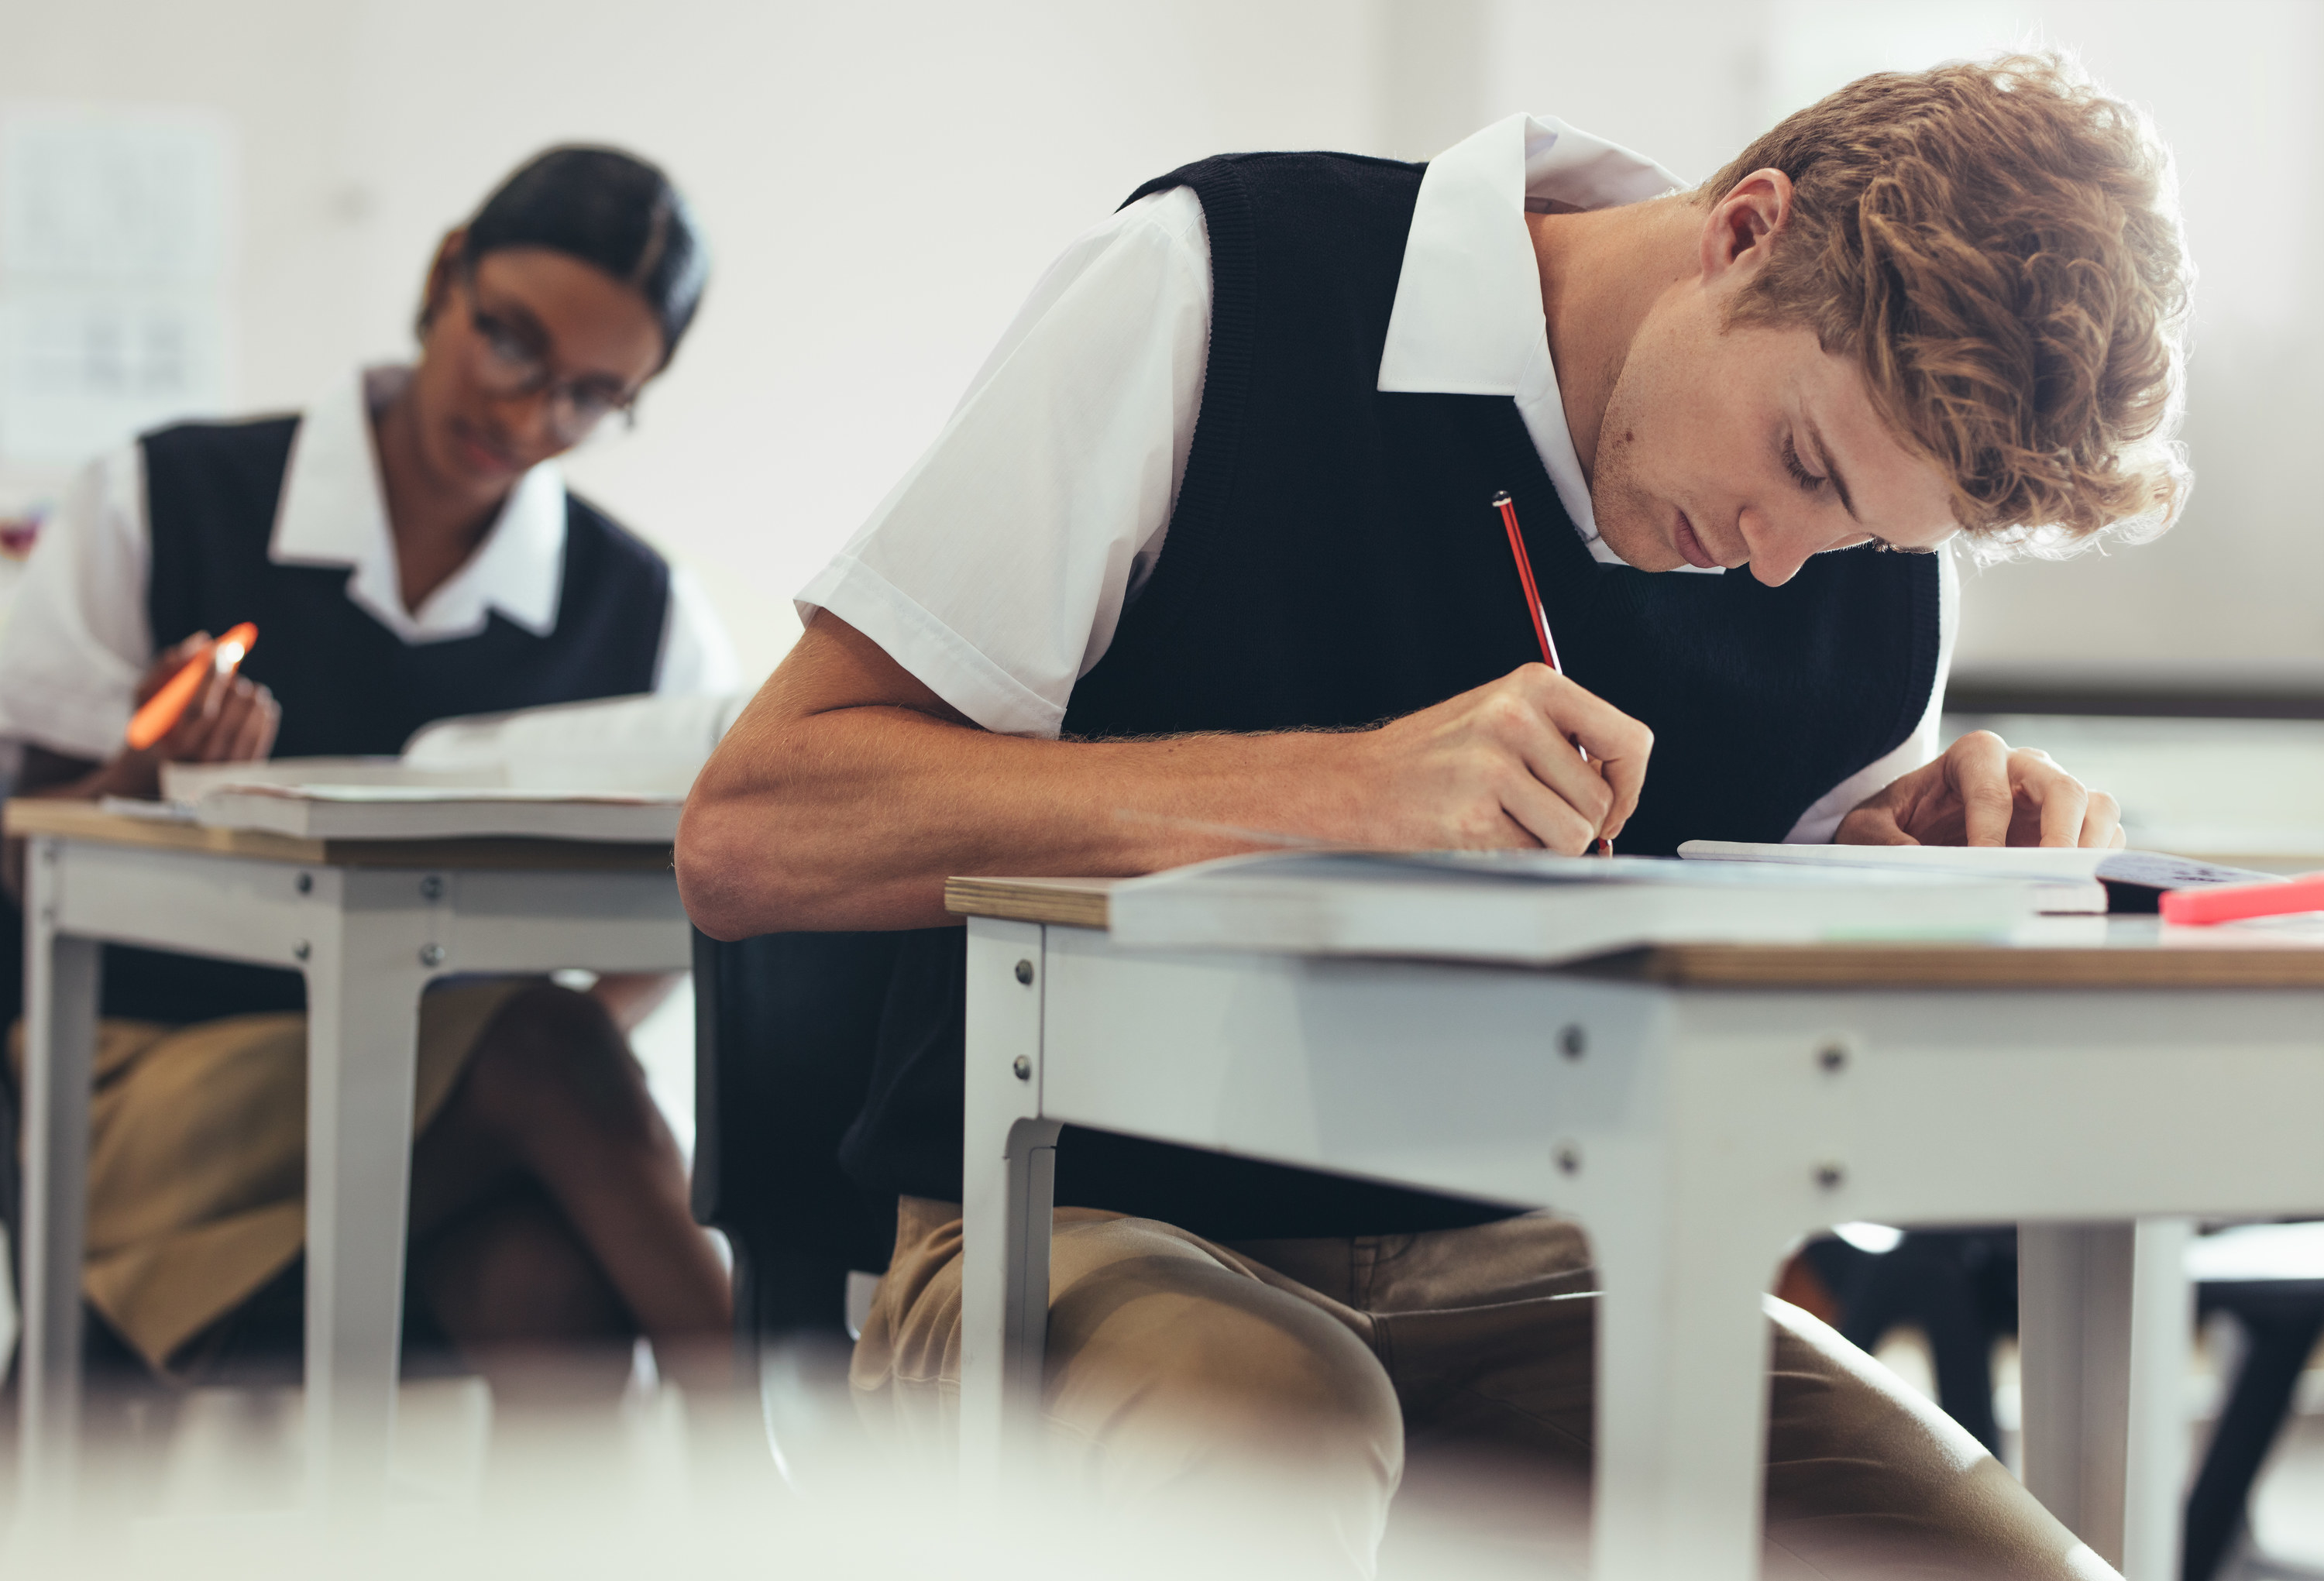 South African students working at their desks in uniforms